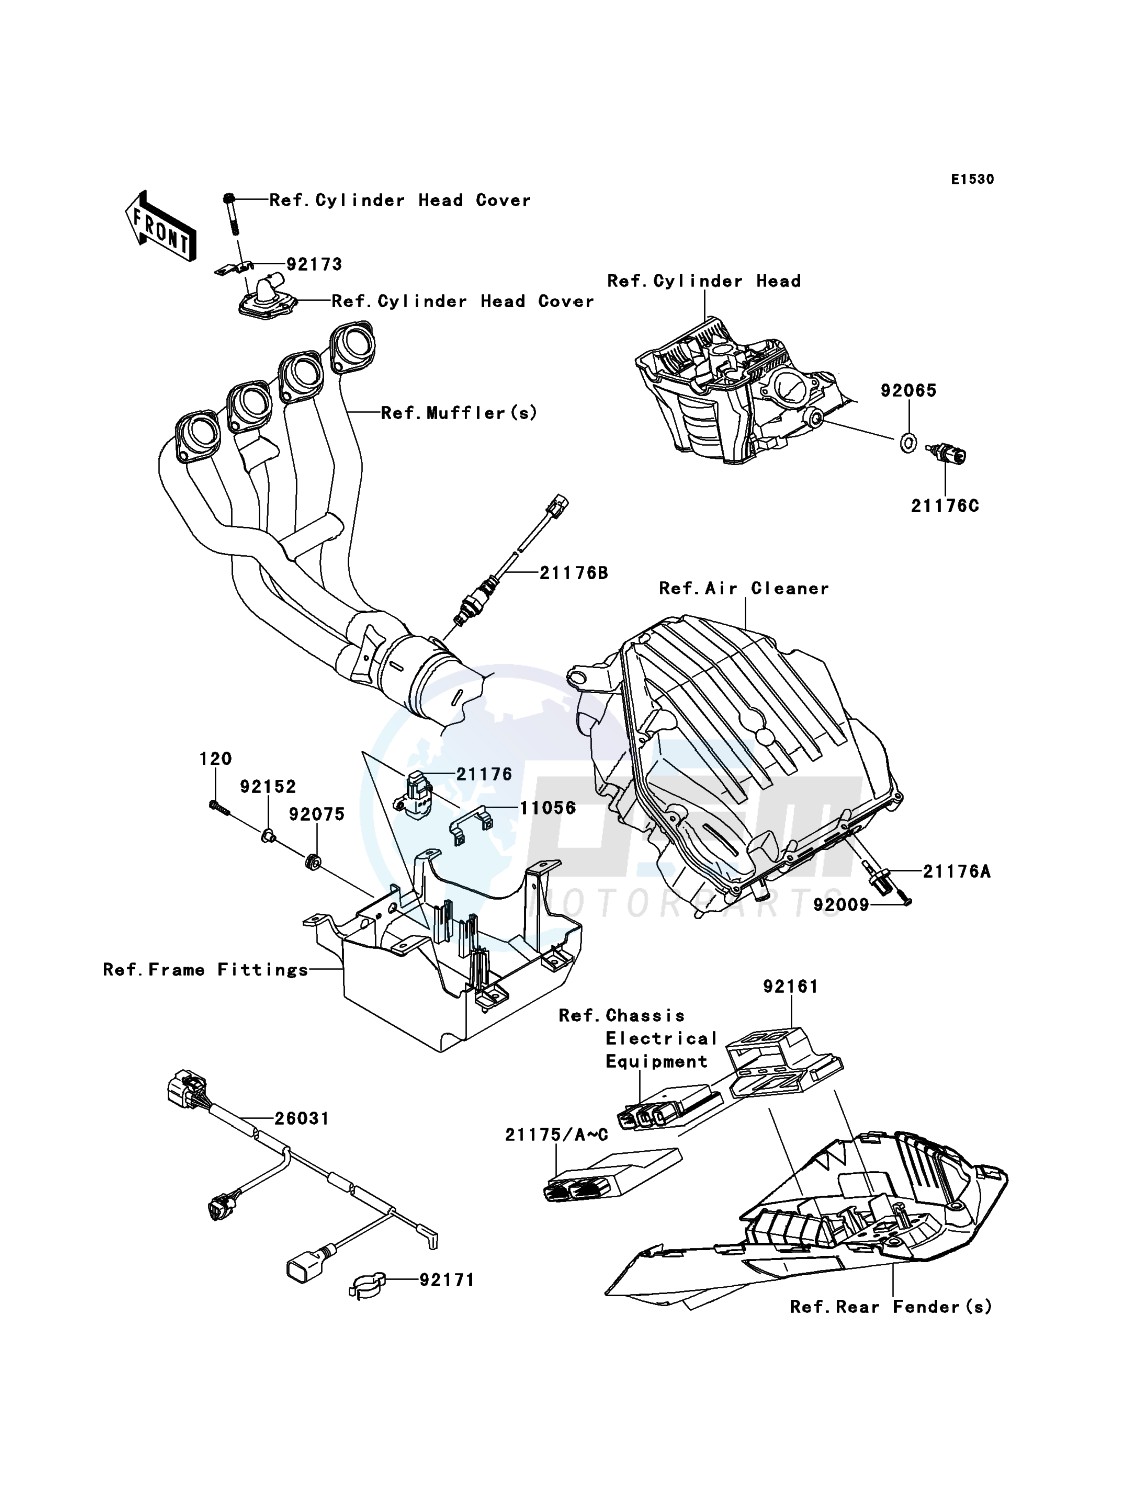 Fuel Injection image